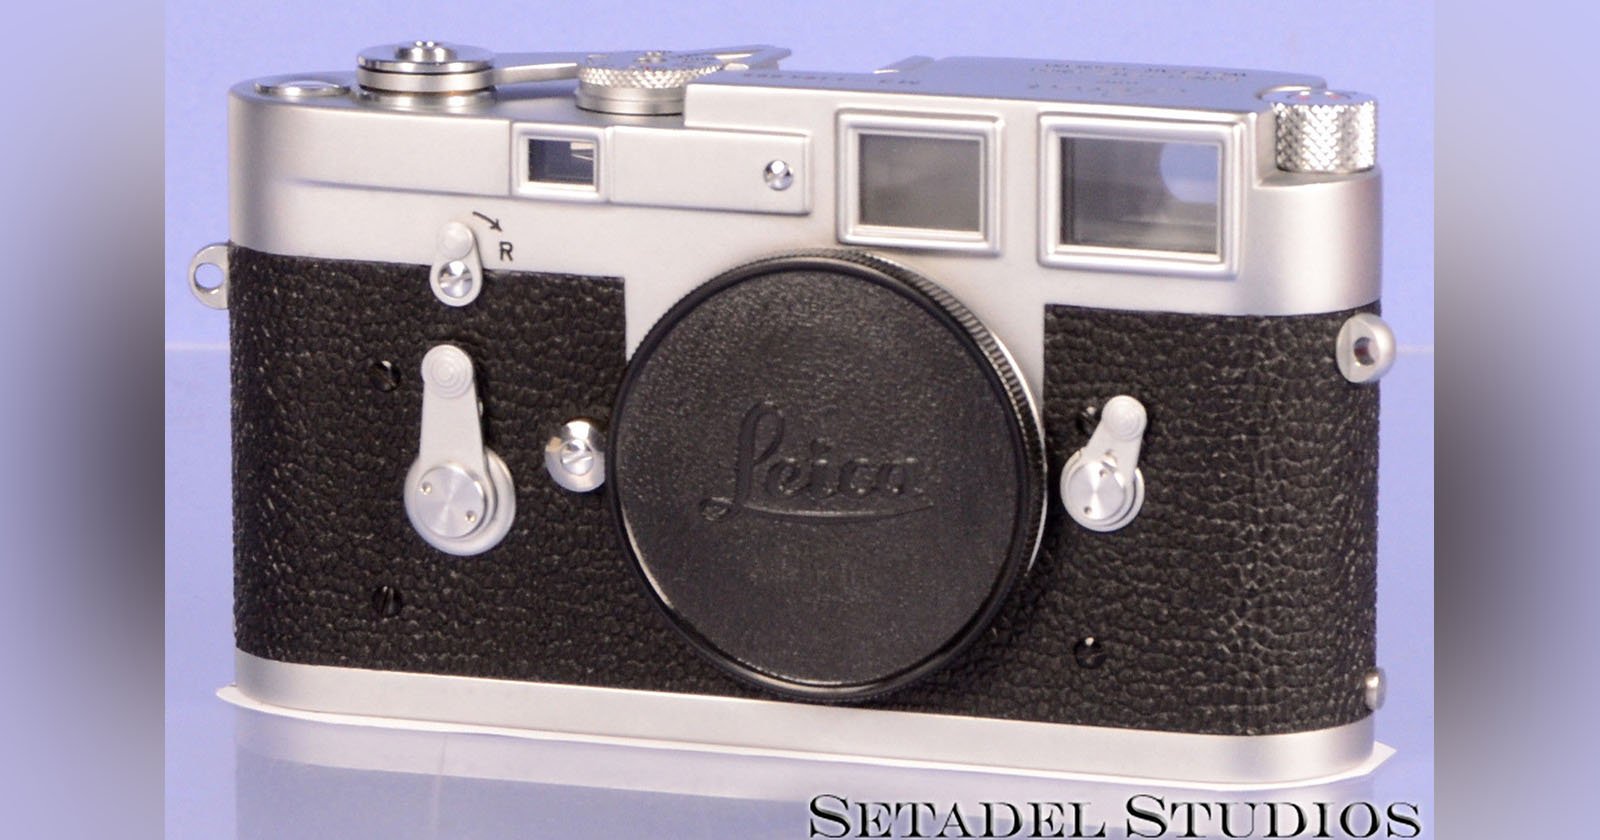 Serena Standaard George Bernard The Last Leica M3 Ever Made Can Be Yours for Just $595,000 | PetaPixel